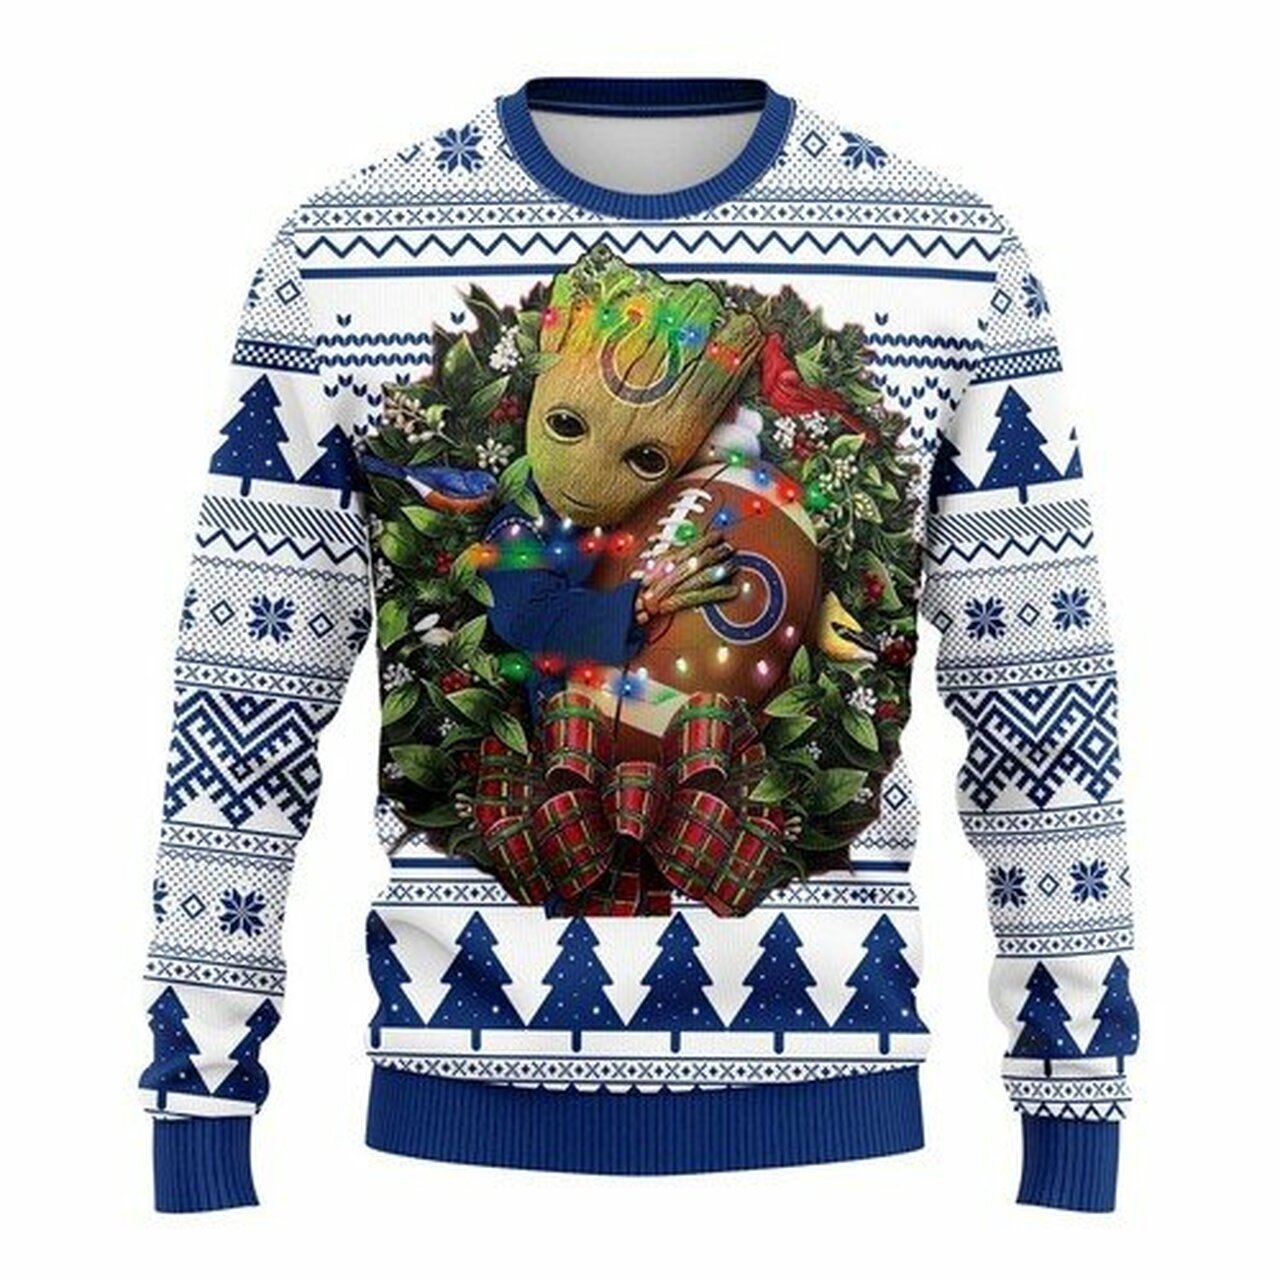 [ HOT ] NFL Indianapolis Colts Groot hug ugly christmas sweater – Saleoff 030122